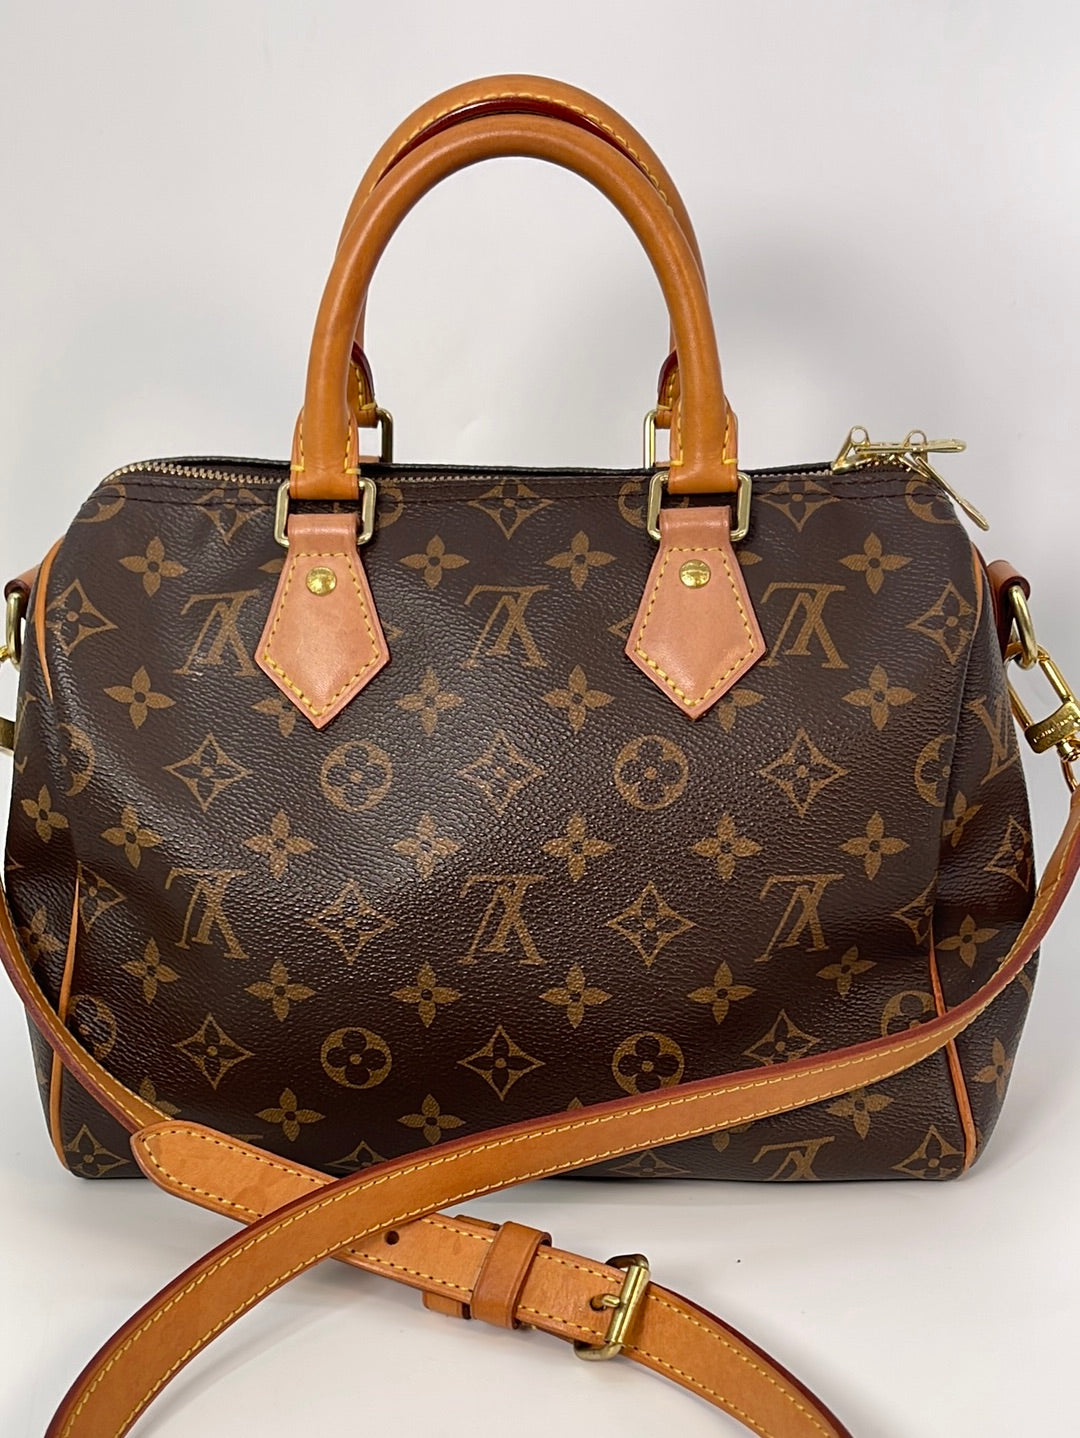 Speedy 25 without strap comes with LV shopping bag,LV dust bag & LV box